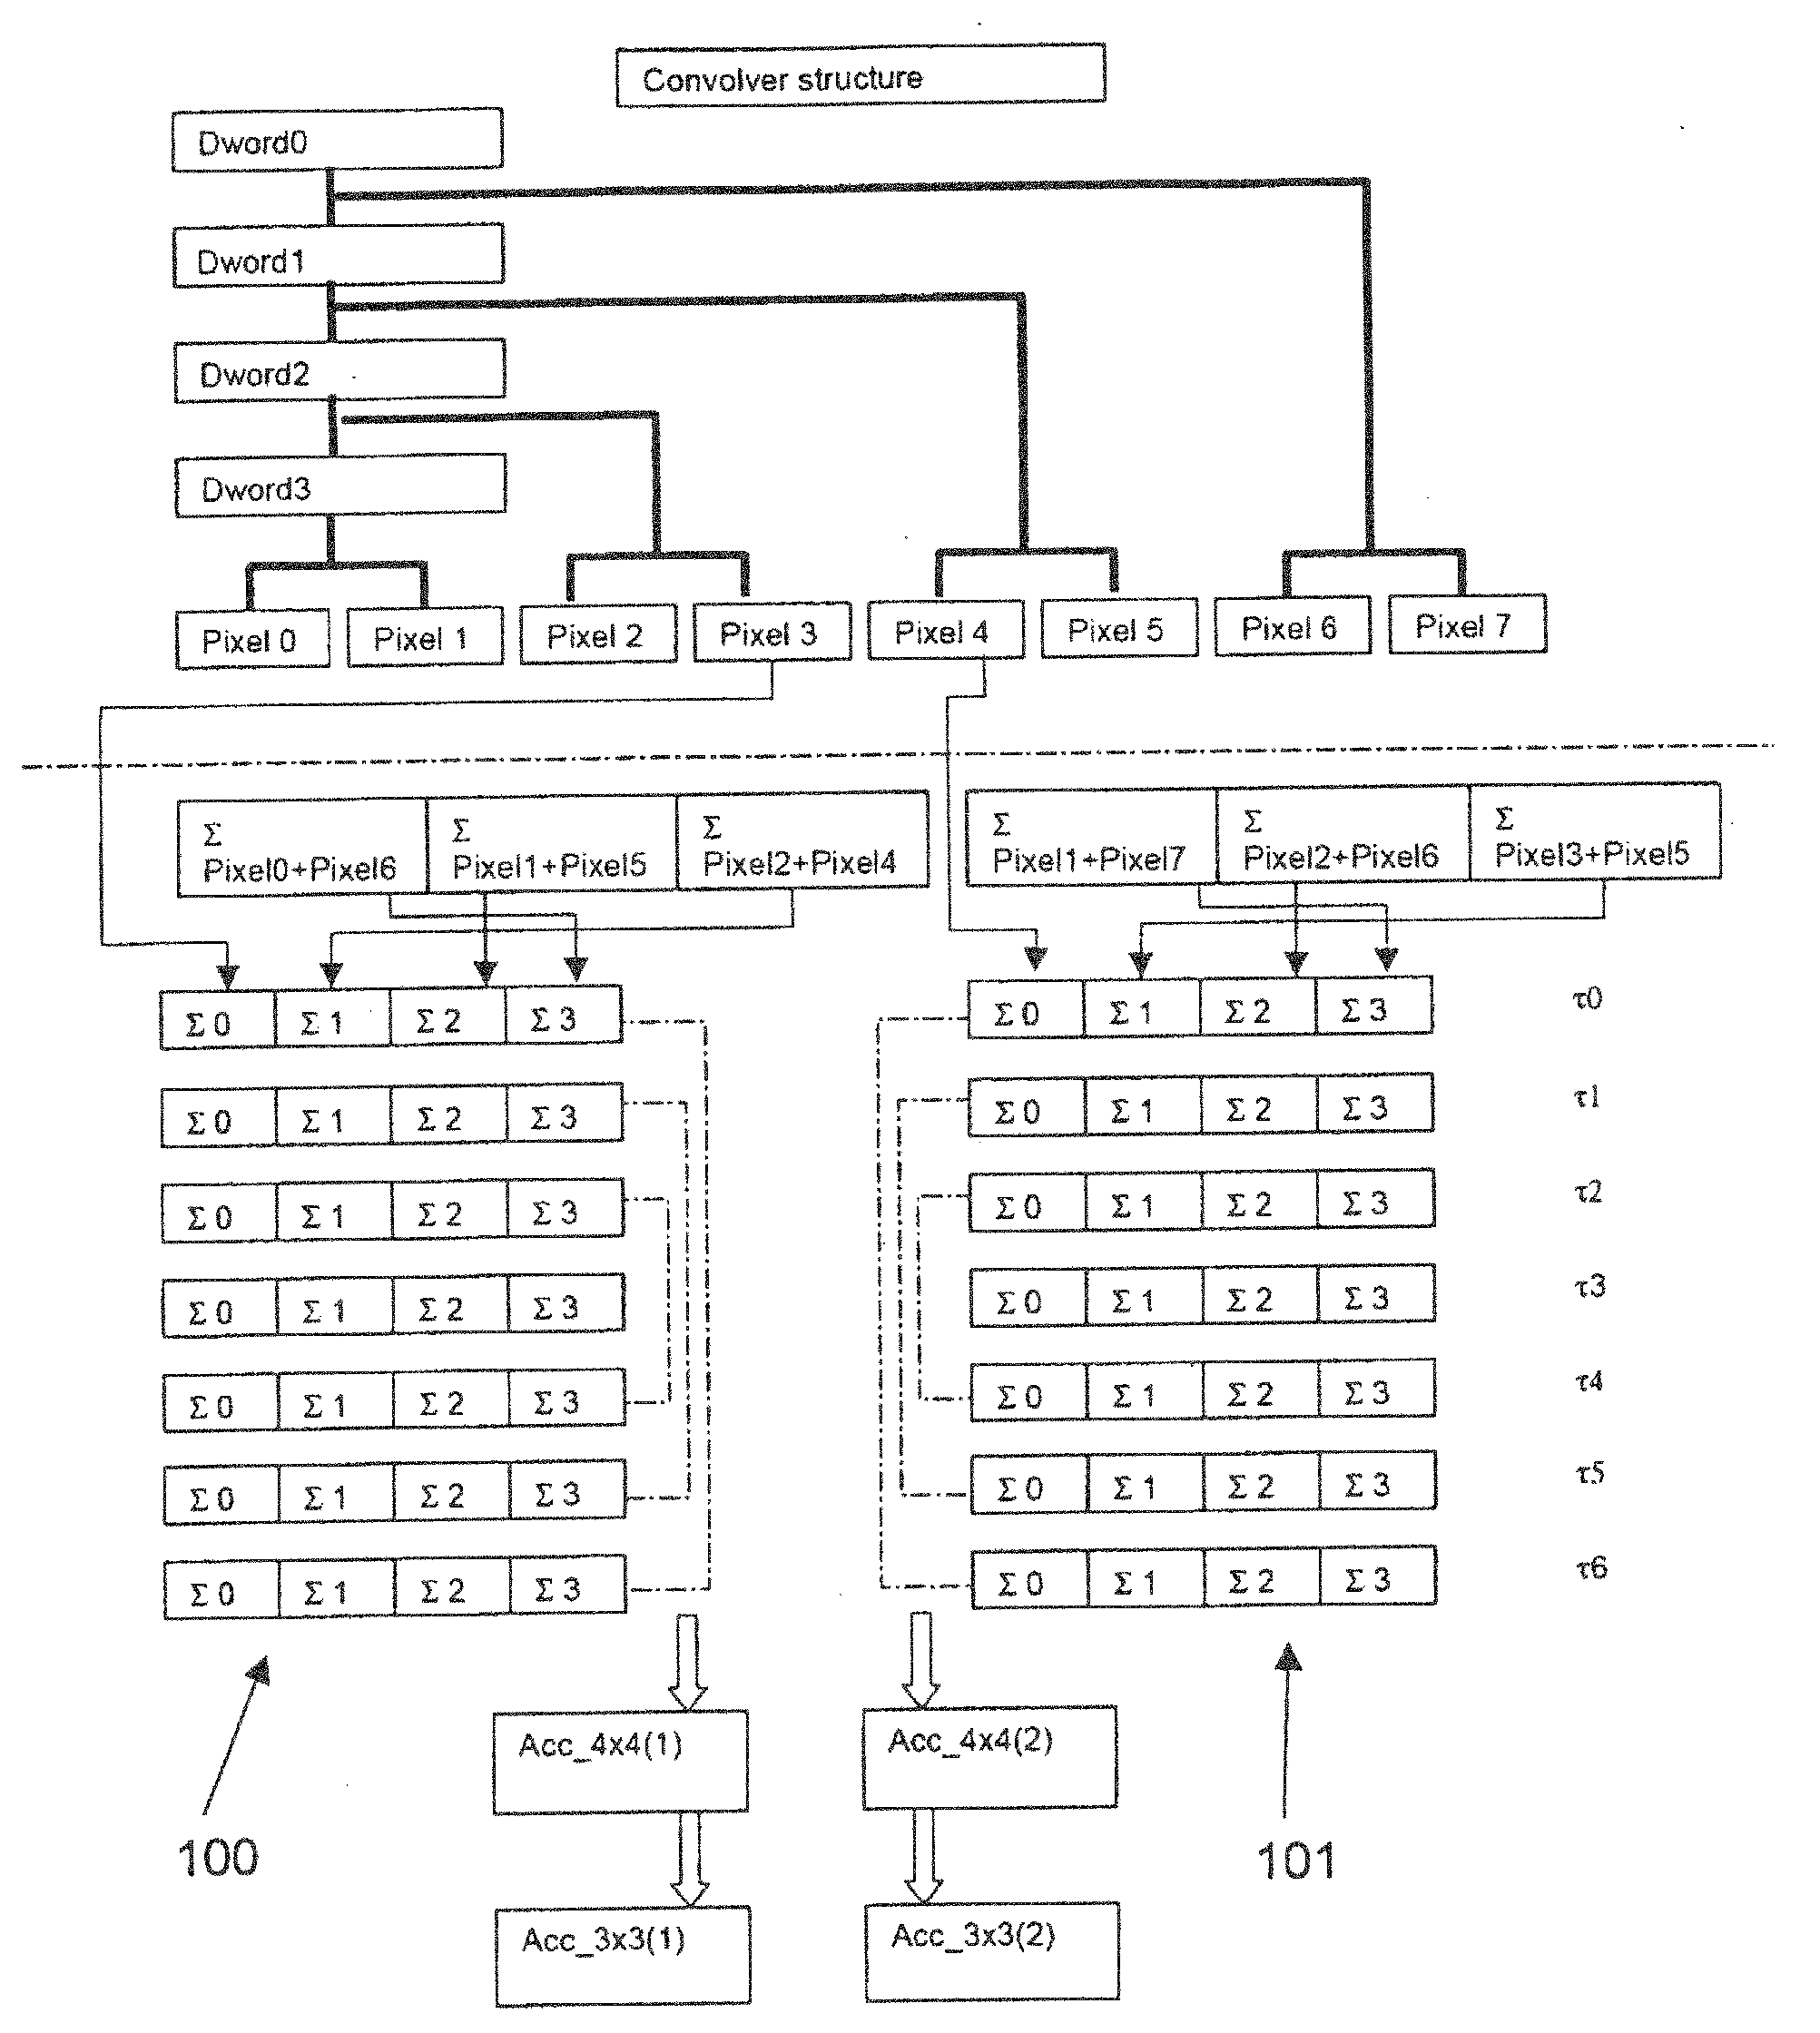 Image-processing device for color image data and method for the image processing of color image data